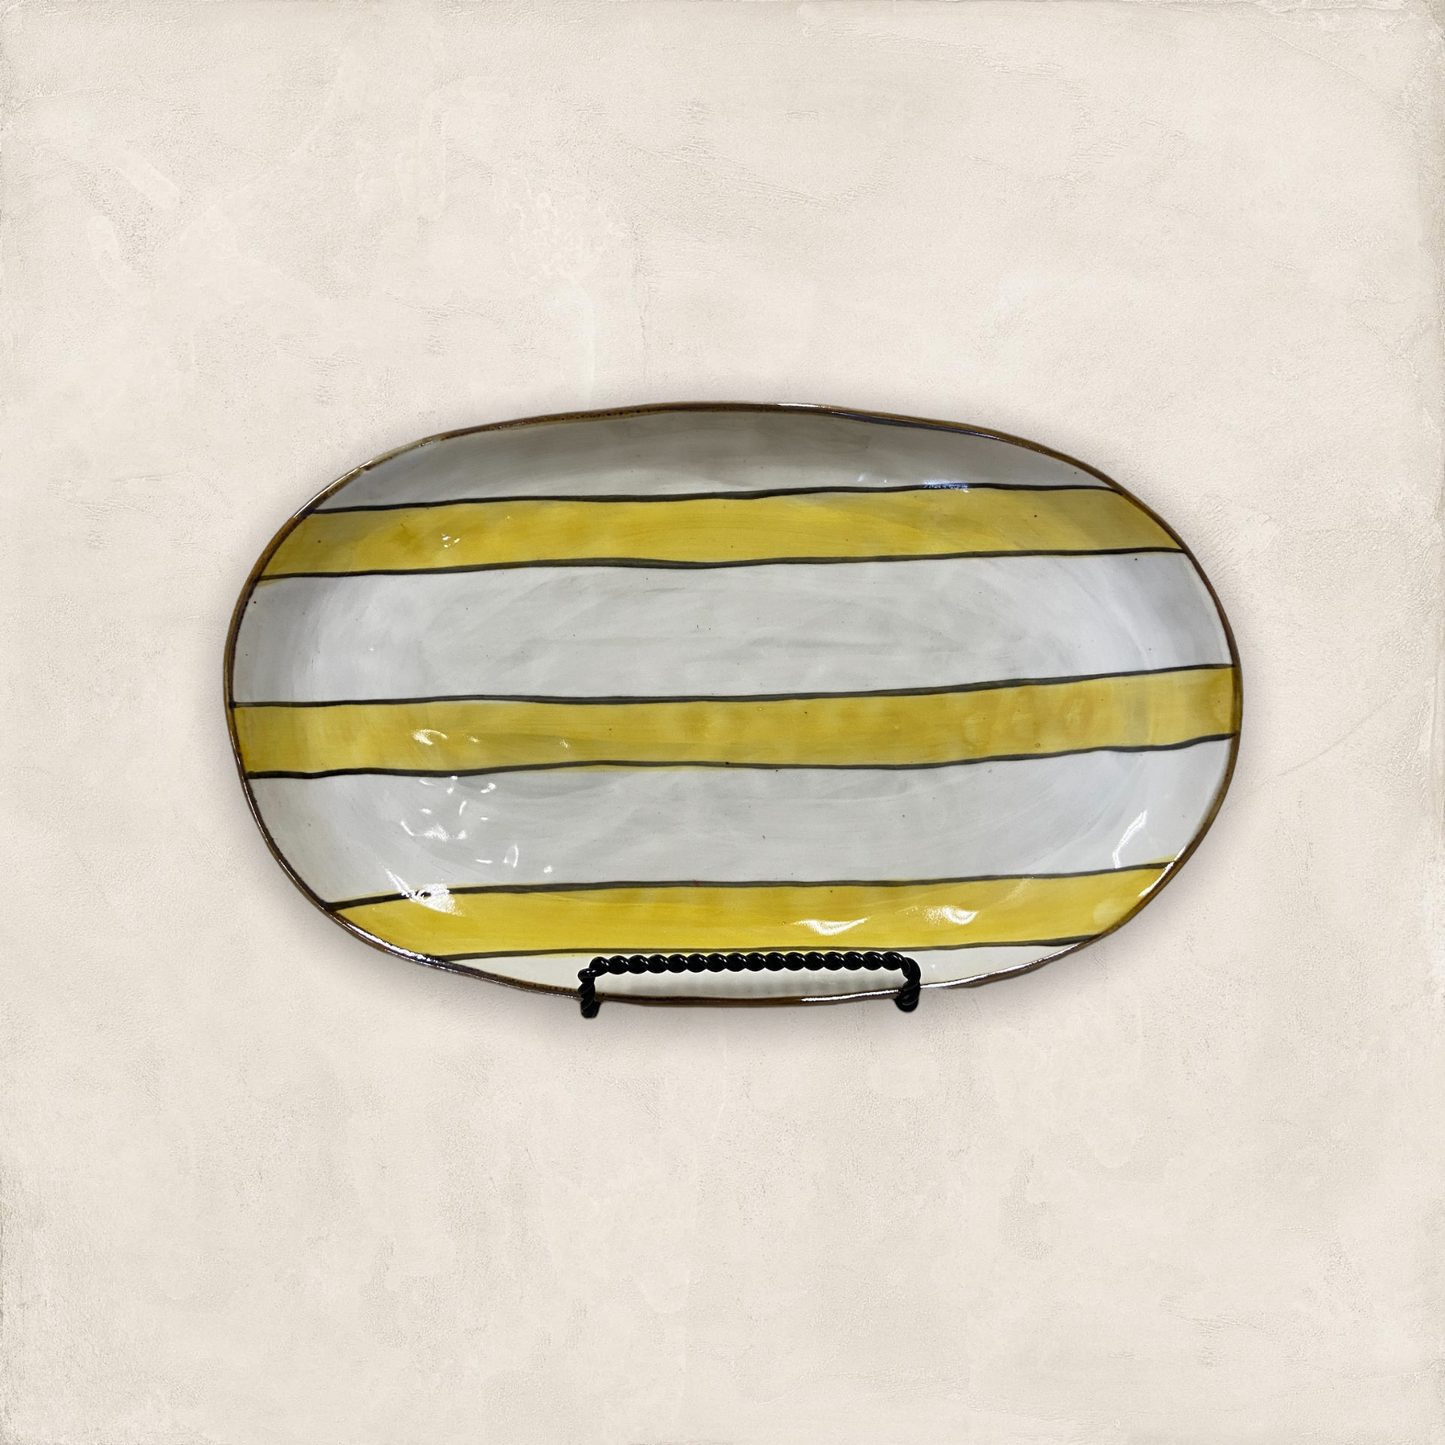 Large oval striped dish